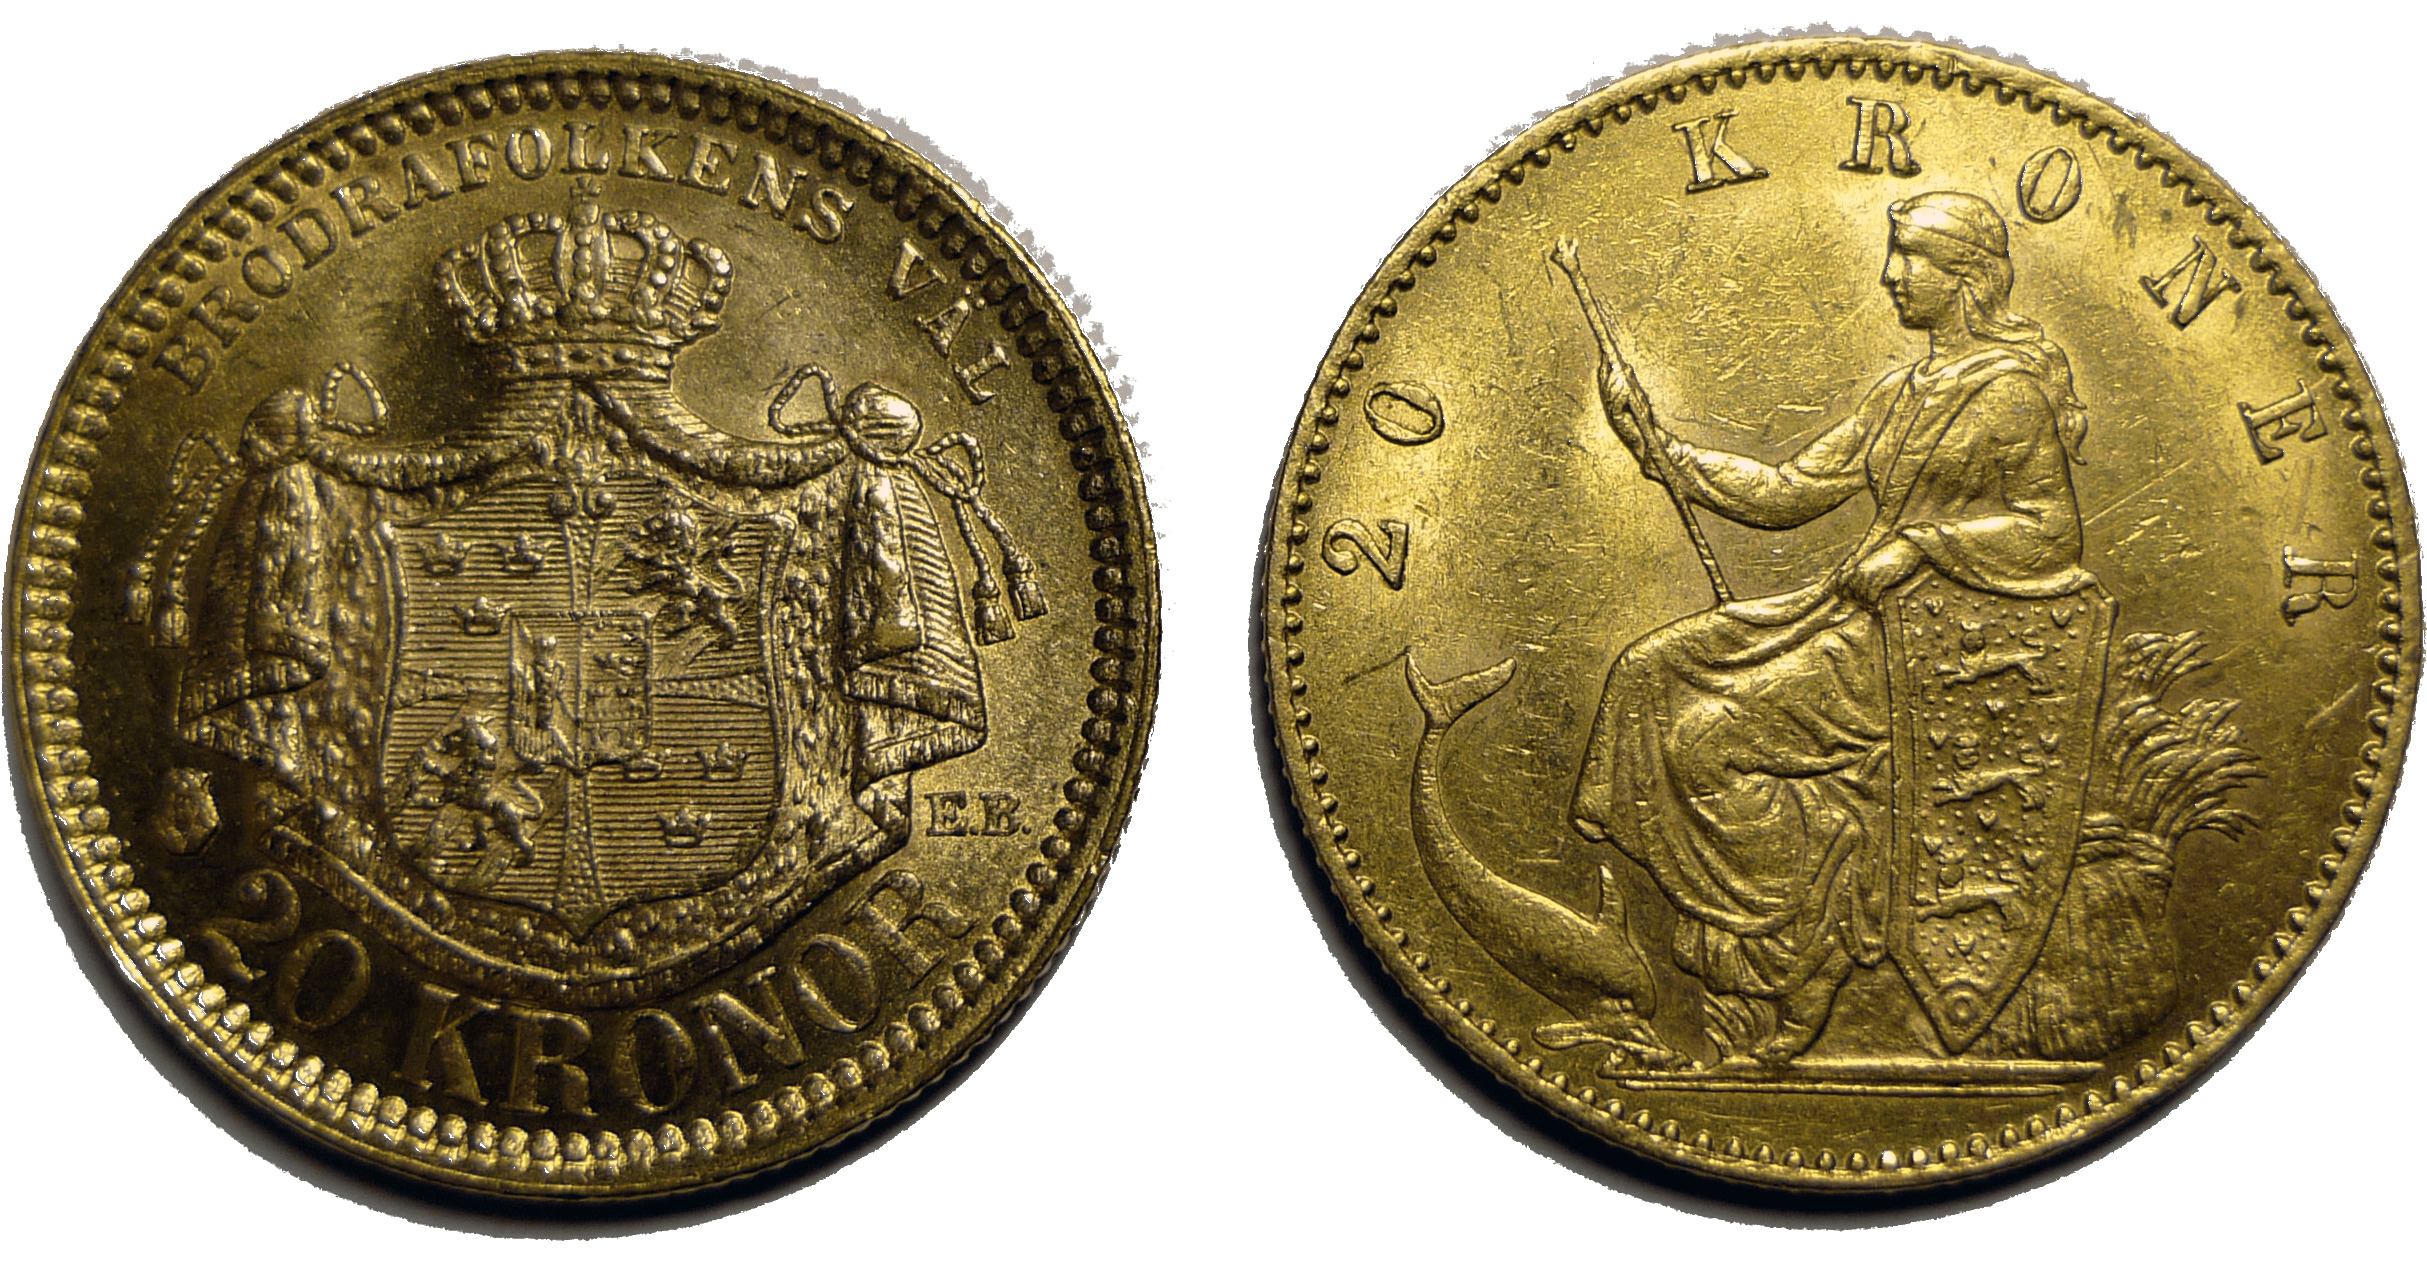 20 Kronor Gold Coins icons